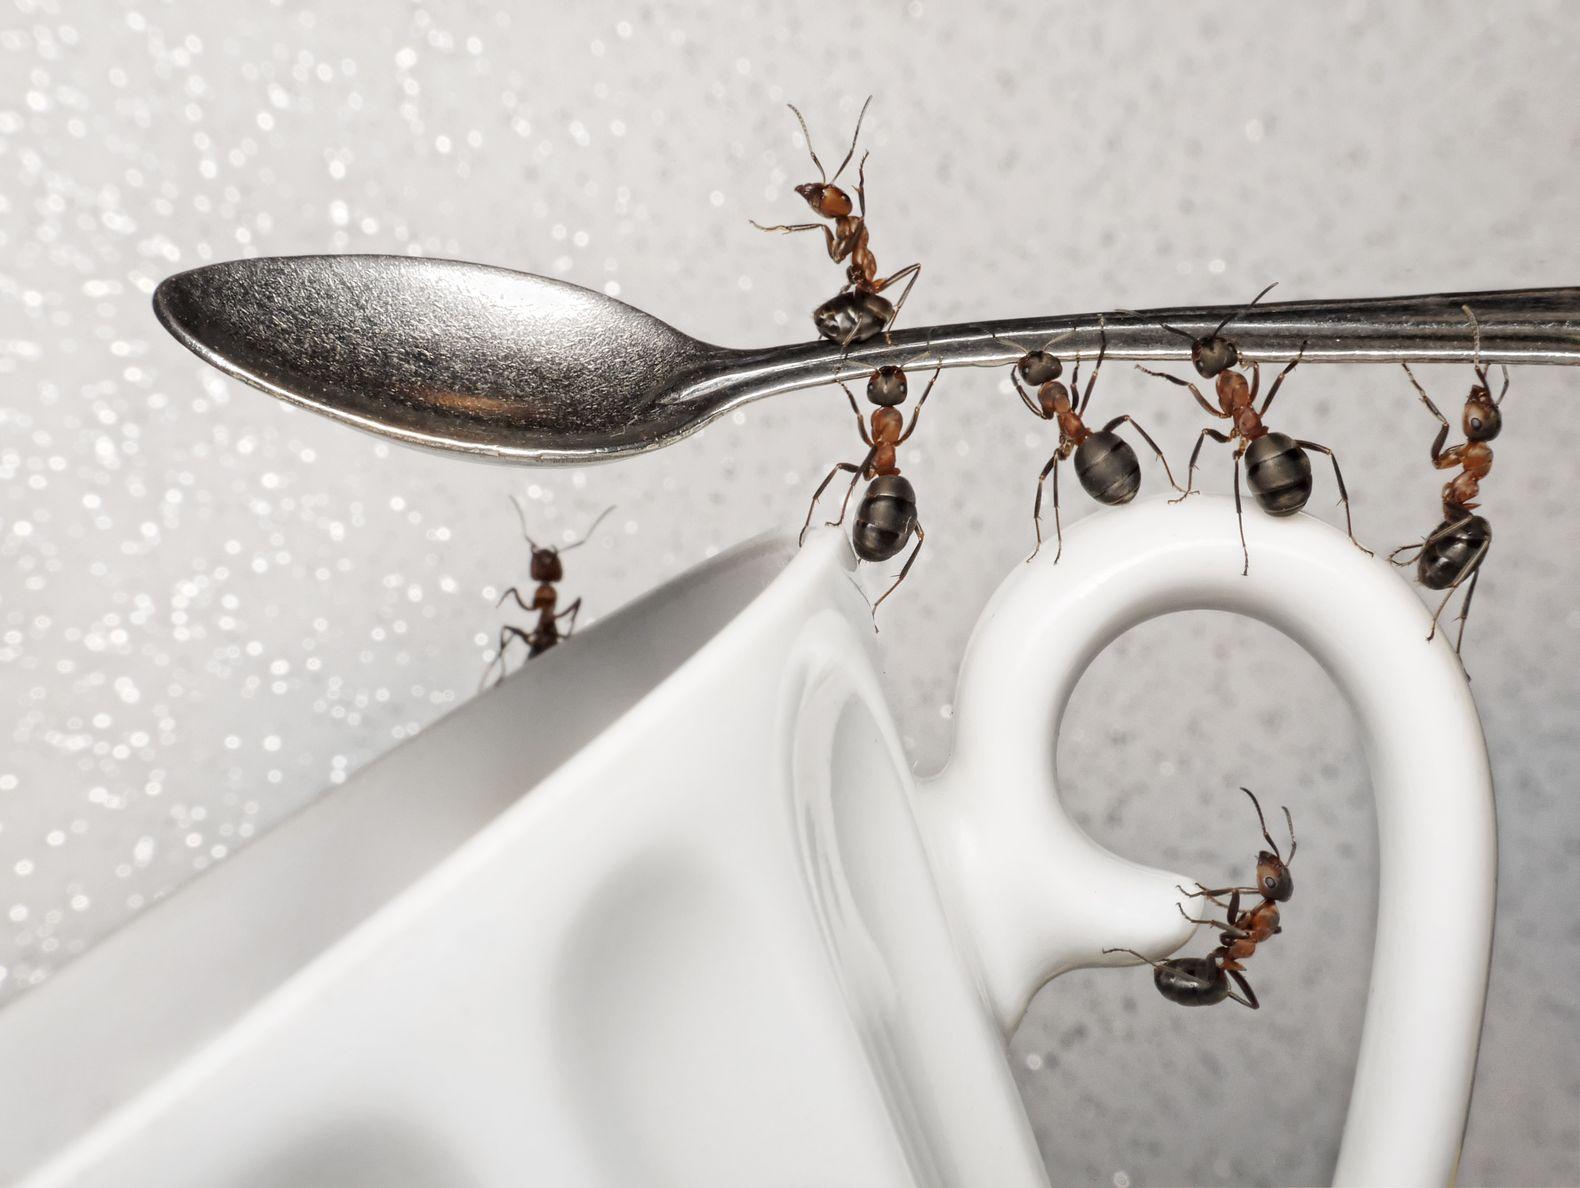 ants in kitchen sink and dishwasher